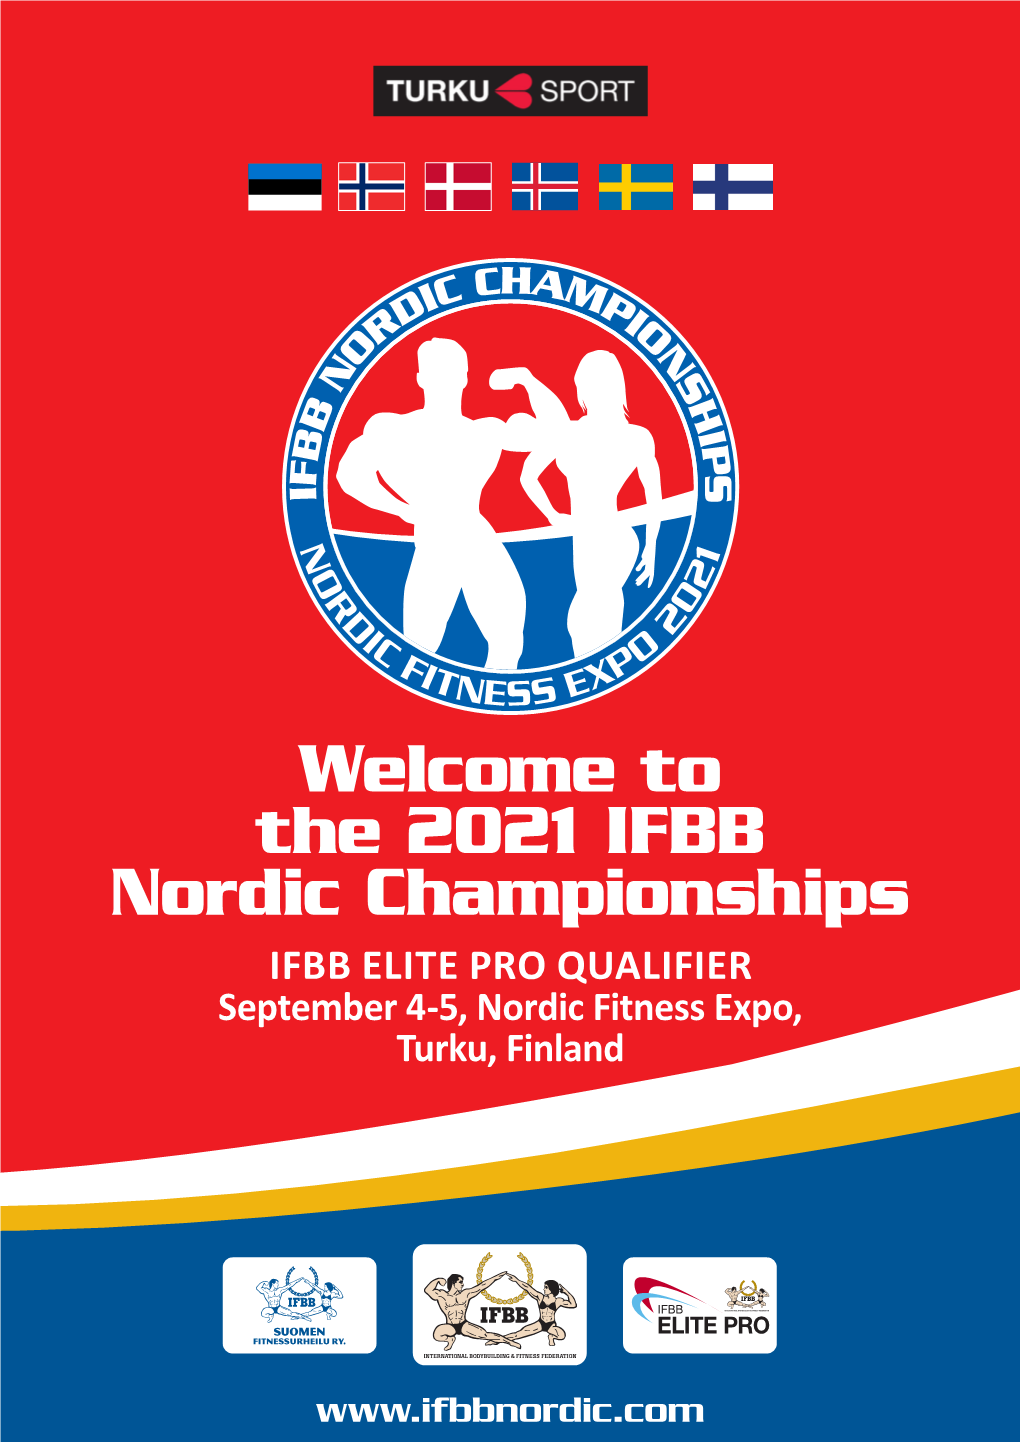 Welcome to the 2021 IFBB Nordic Championships IFBB ELITE PRO QUALIFIER September 4-5, Nordic Fitness Expo, Turku, Finland